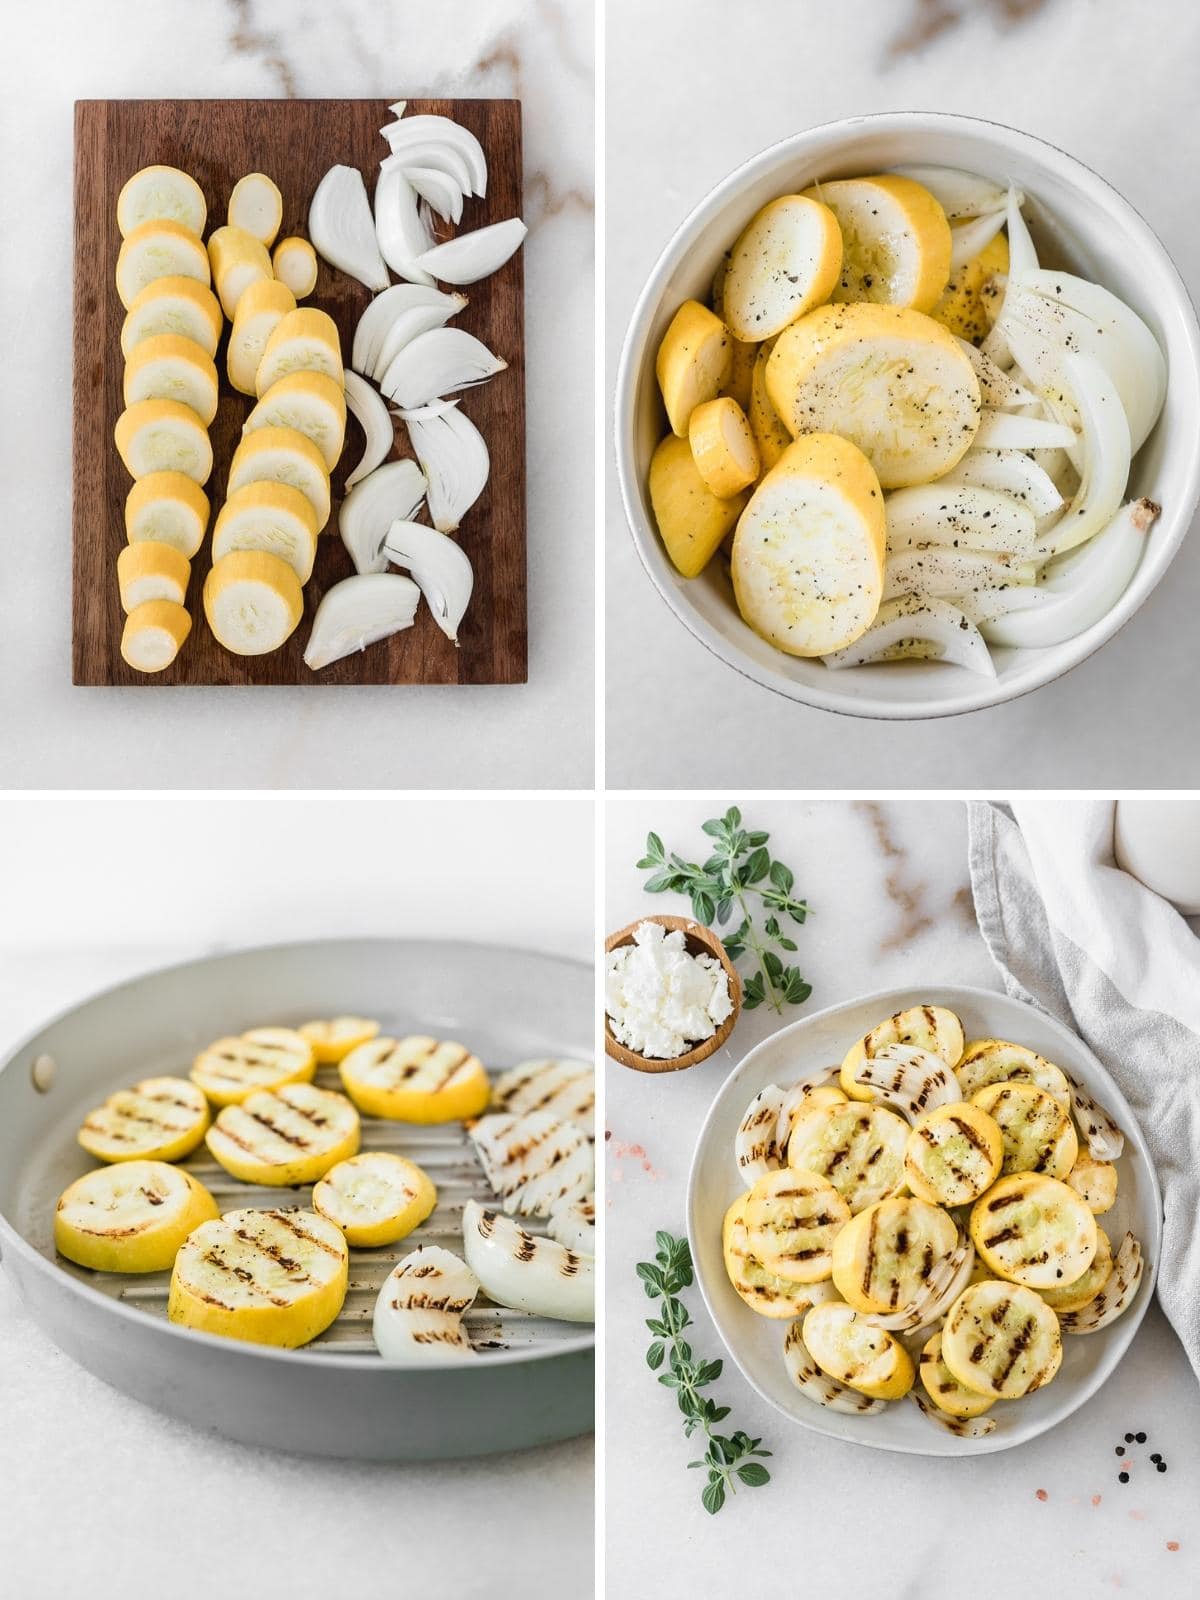 four image collage showing steps for making grilled yellow squash and onions.